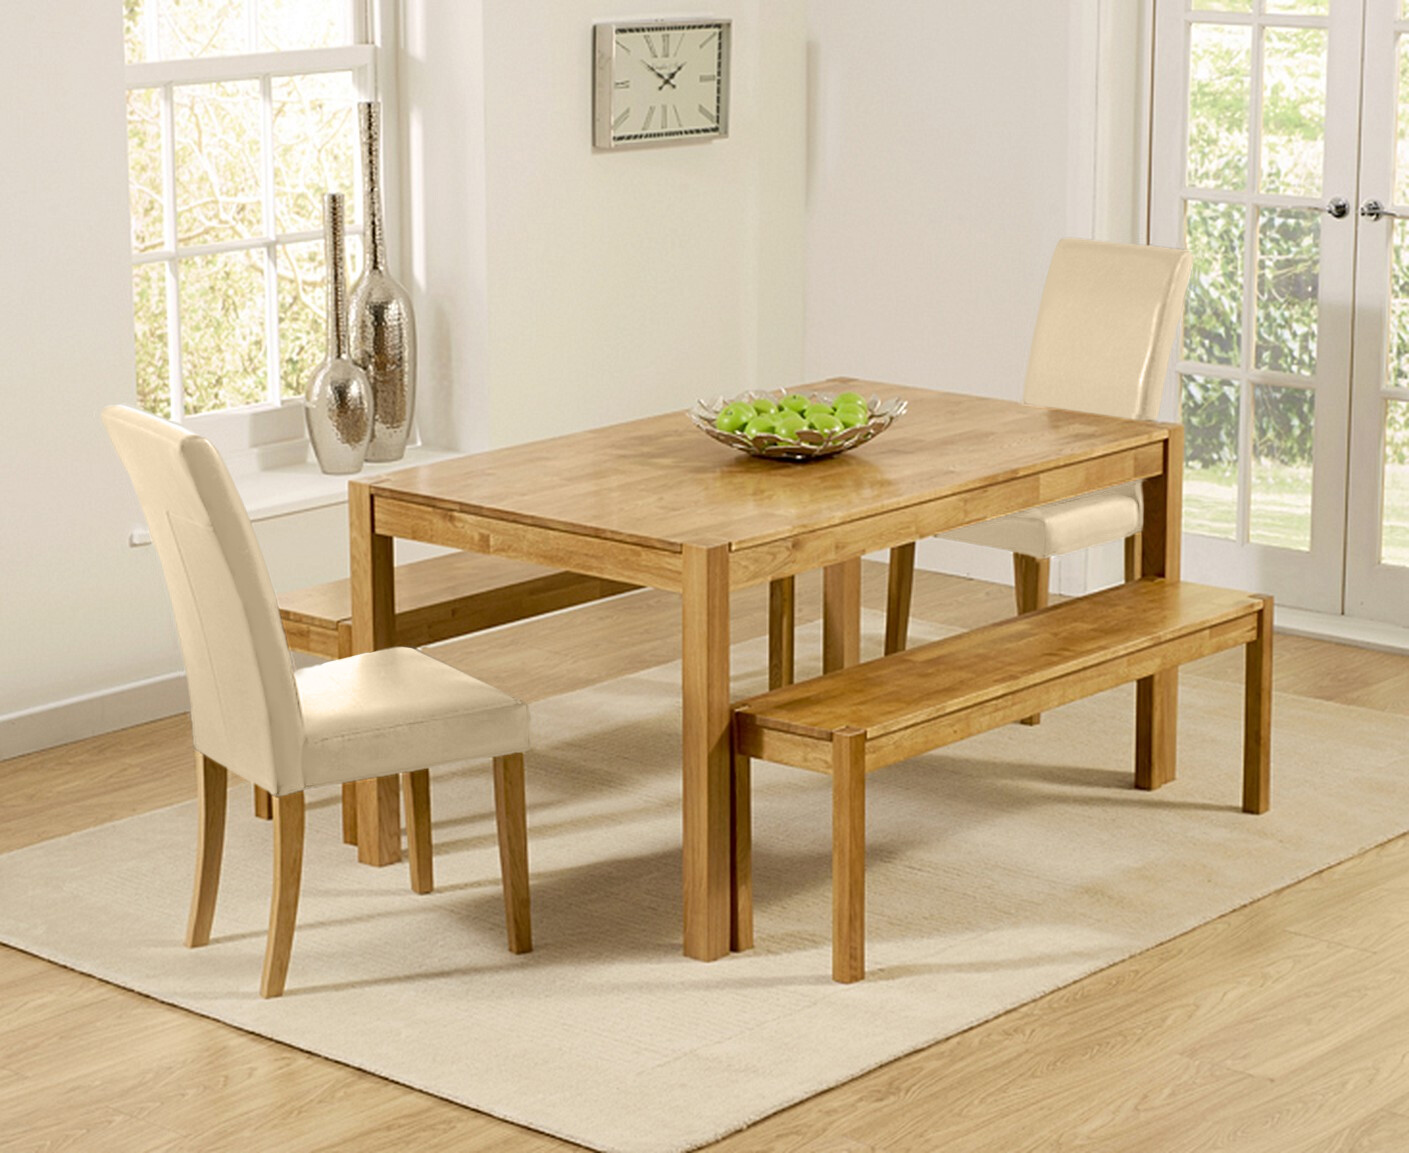 Photo 2 of York 150cm solid oak dining table with 4 cream olivia chairs and 1 york benches